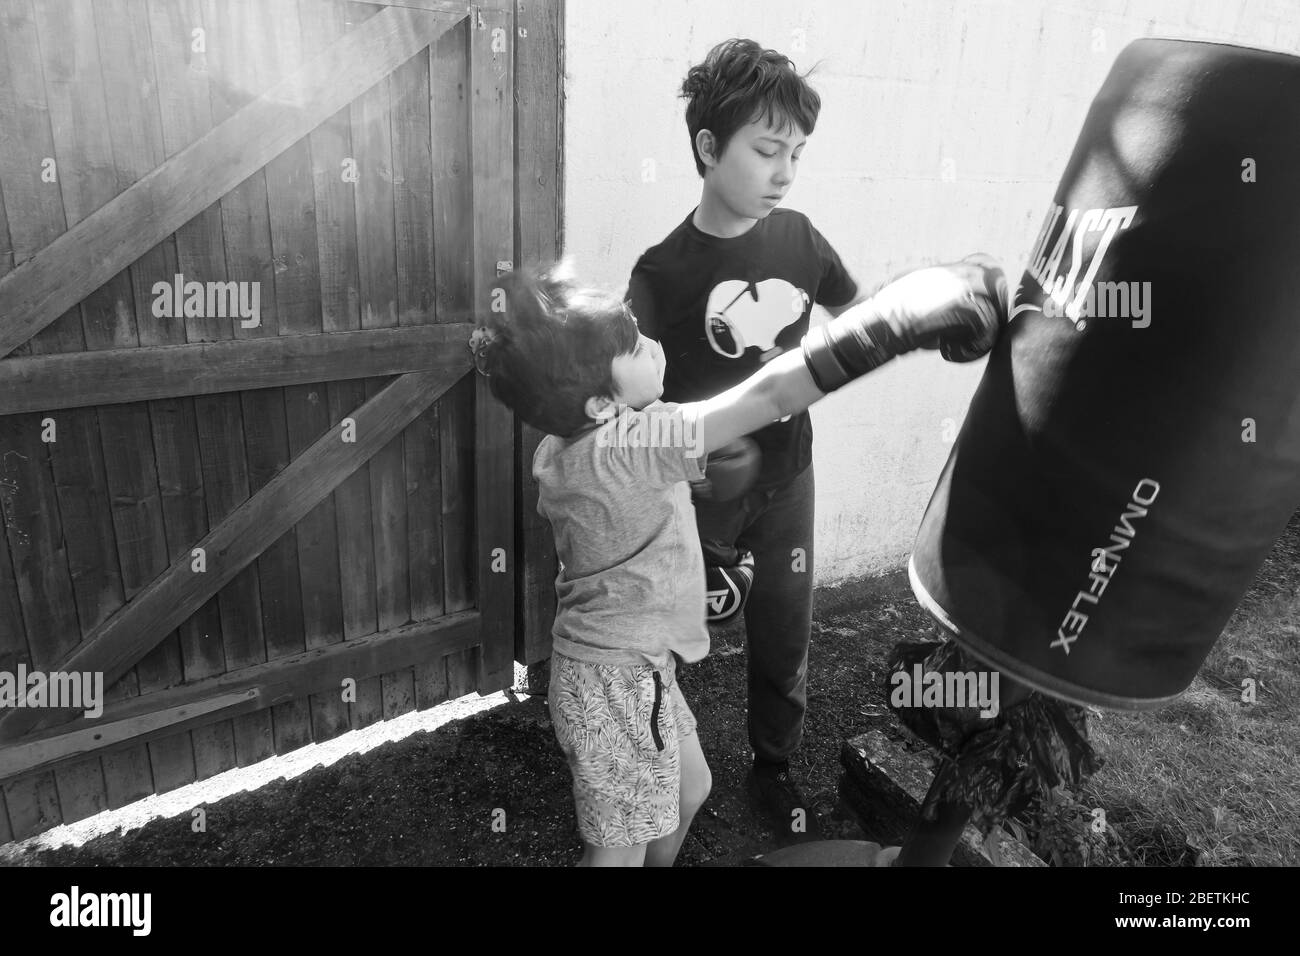 Young brothers wearing boxing gloves punch a punching bag in the garden for exercise. Stock Photo